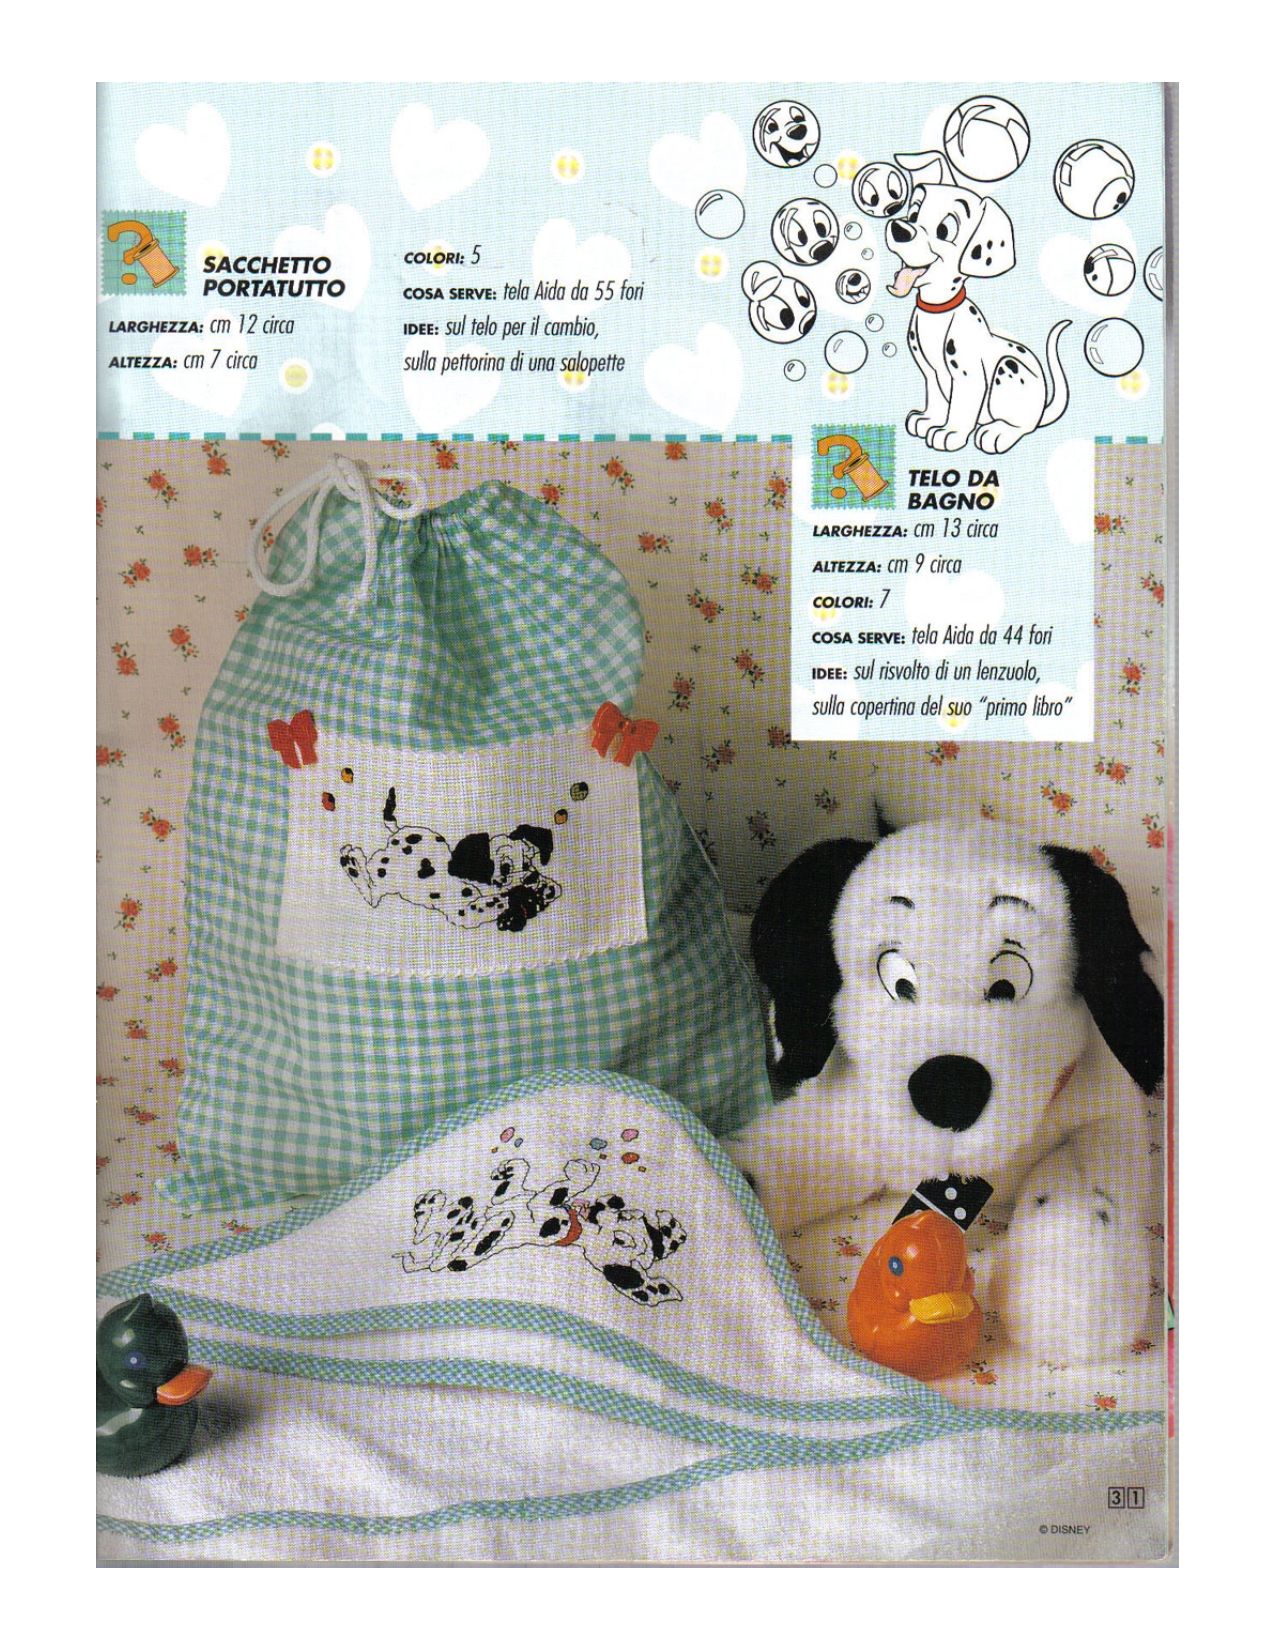 Various cross stitch patterns of One Hundred and One Dalmatians (1)